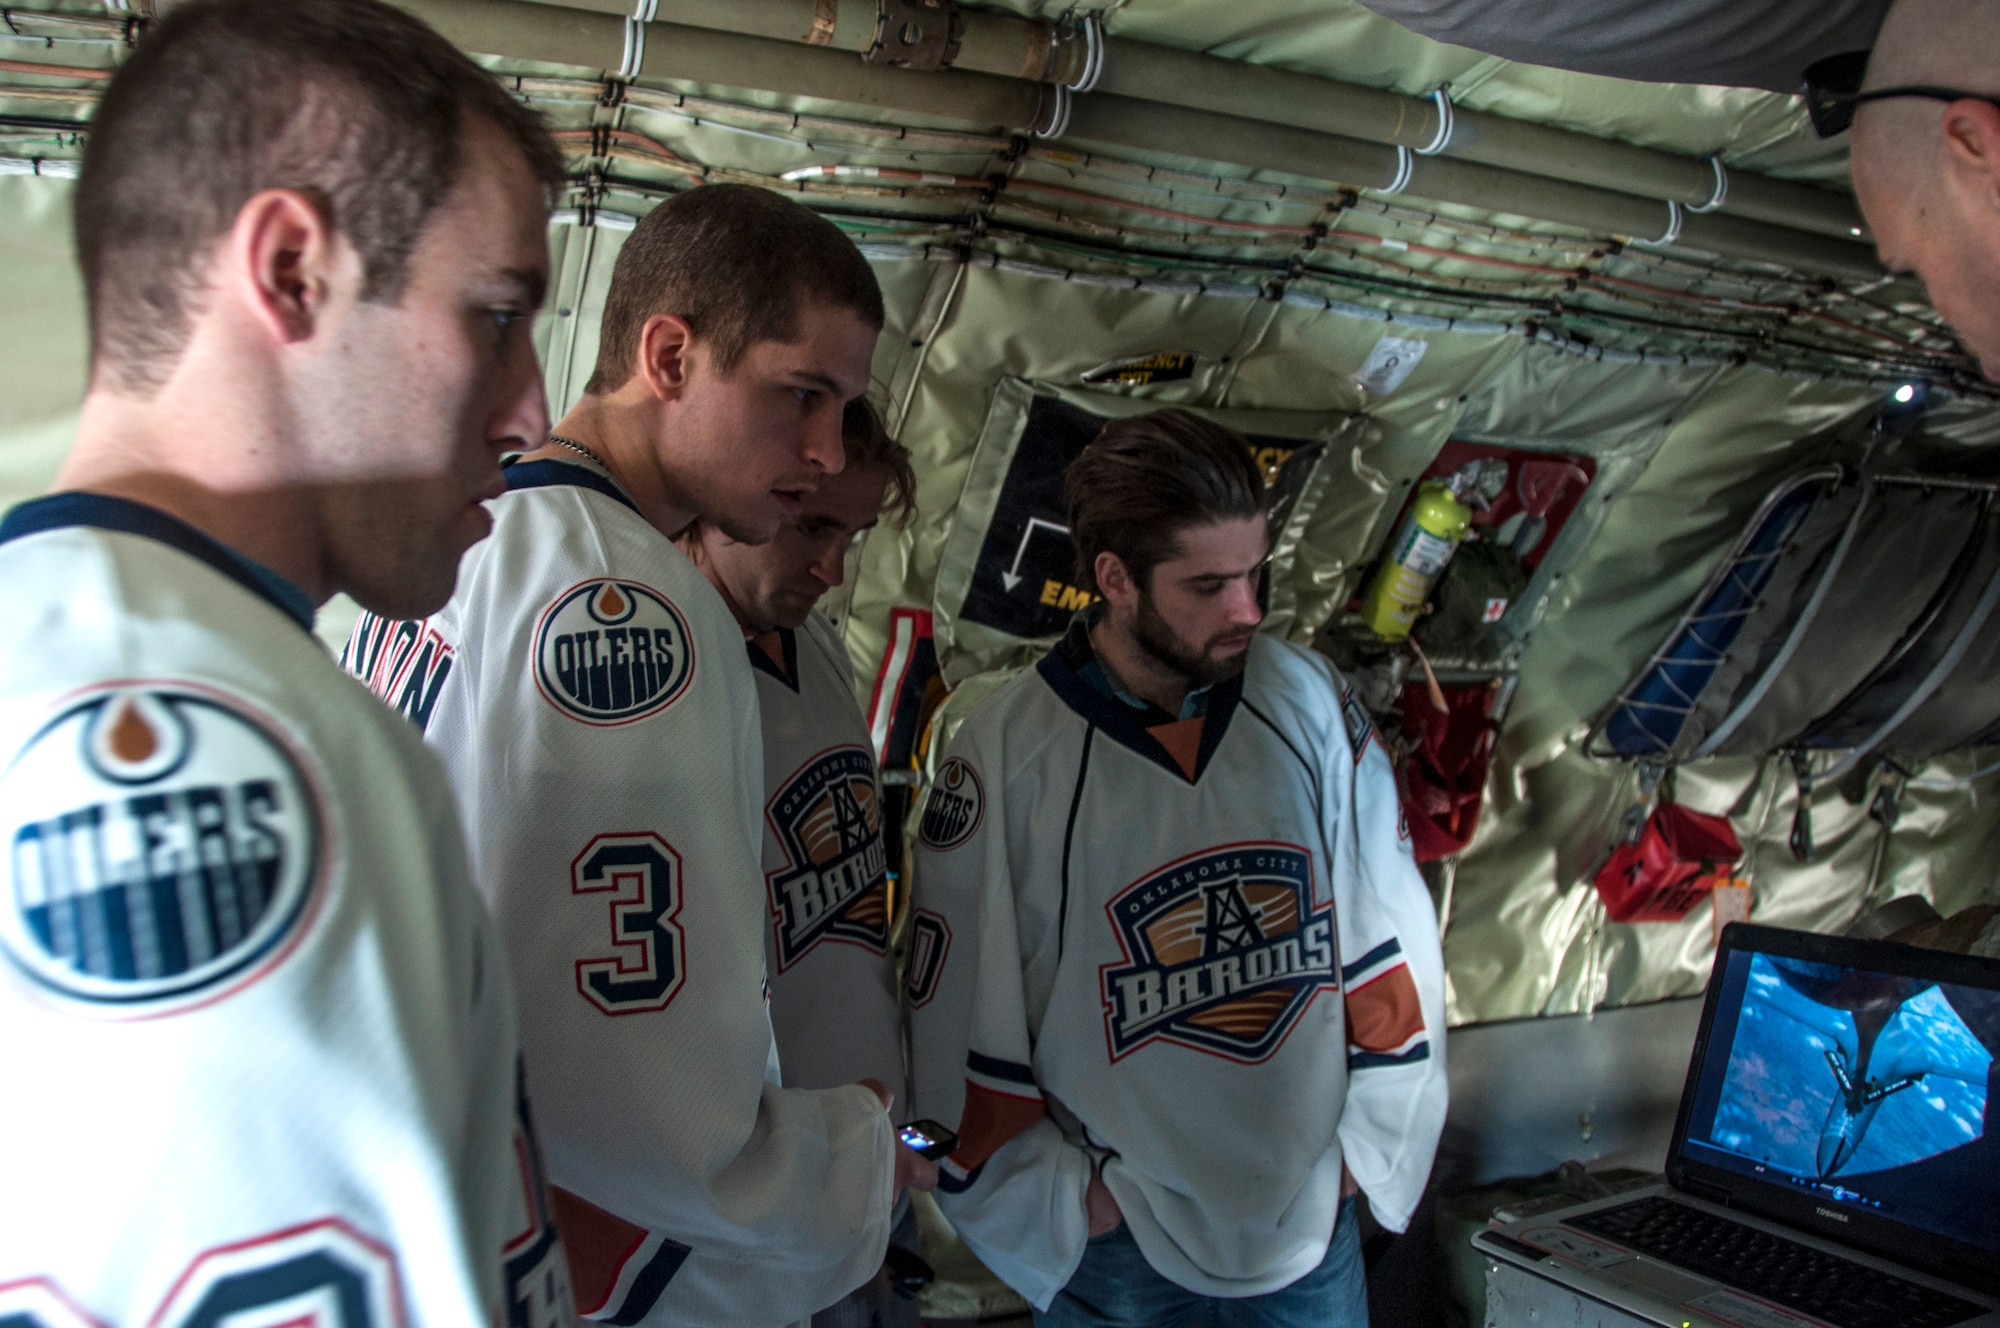 Members from the Oklahoma City Barons hockey team watch a video of an aerial refueling while touring a KC-135R Stratotanker here January 14, 2014.  The players volunteered for a floor hockey game as part of a winning raffle by 507th Civil Engineering Squadron’s Senior Master Sgt. Daniel Bostwick.  Five members from the 507th and 137th Oklahoma Air National Guard Air Refueling Wings participated in the game as dozens more took time to come watch.  The Oklahoma City Barons are part of the National Hockey League’s Edmonton Oilers.  (U.S. Air Force photo/Senior Airman Mark Hybers)